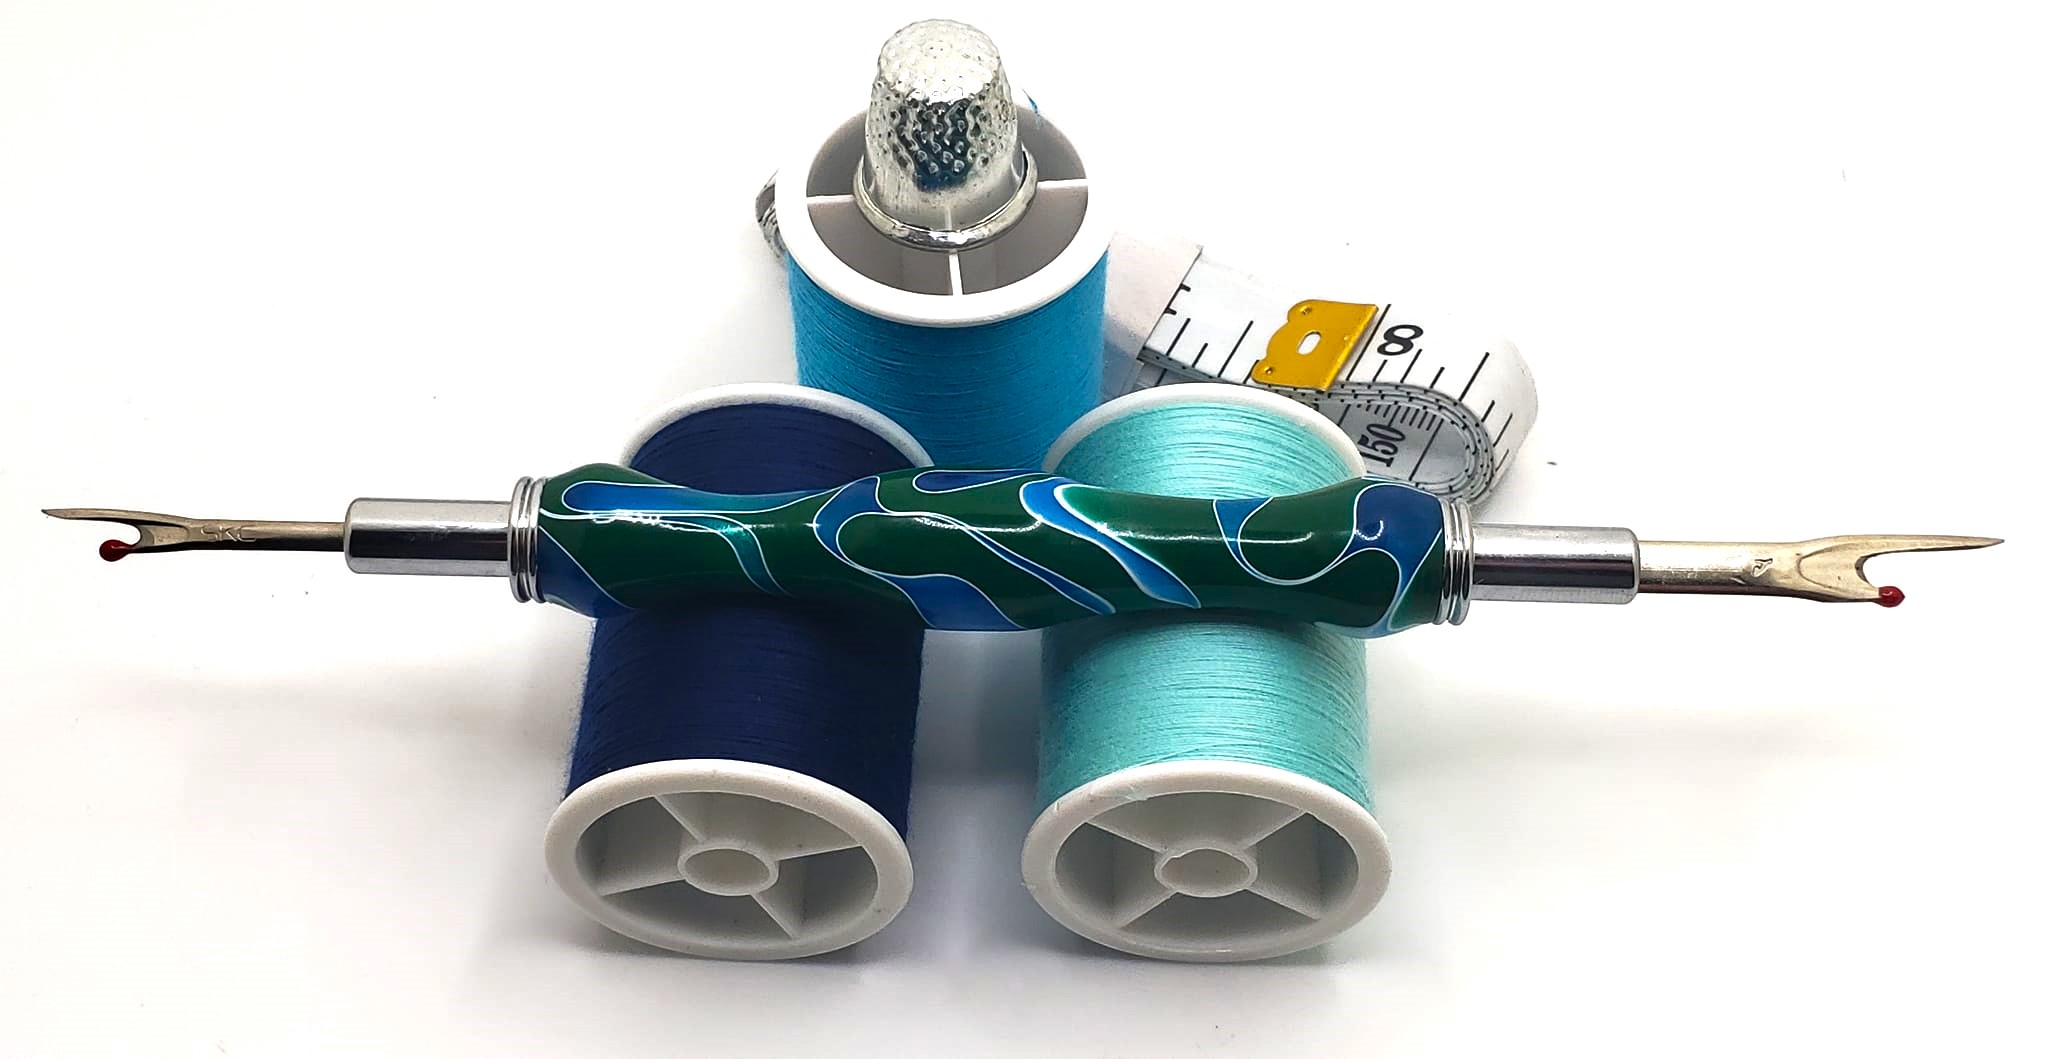 Sewing Seam Ripper – Emerald Green and Blue and Silver Epoxy. The seam ripper ends can flip and back into the shaft for protection.